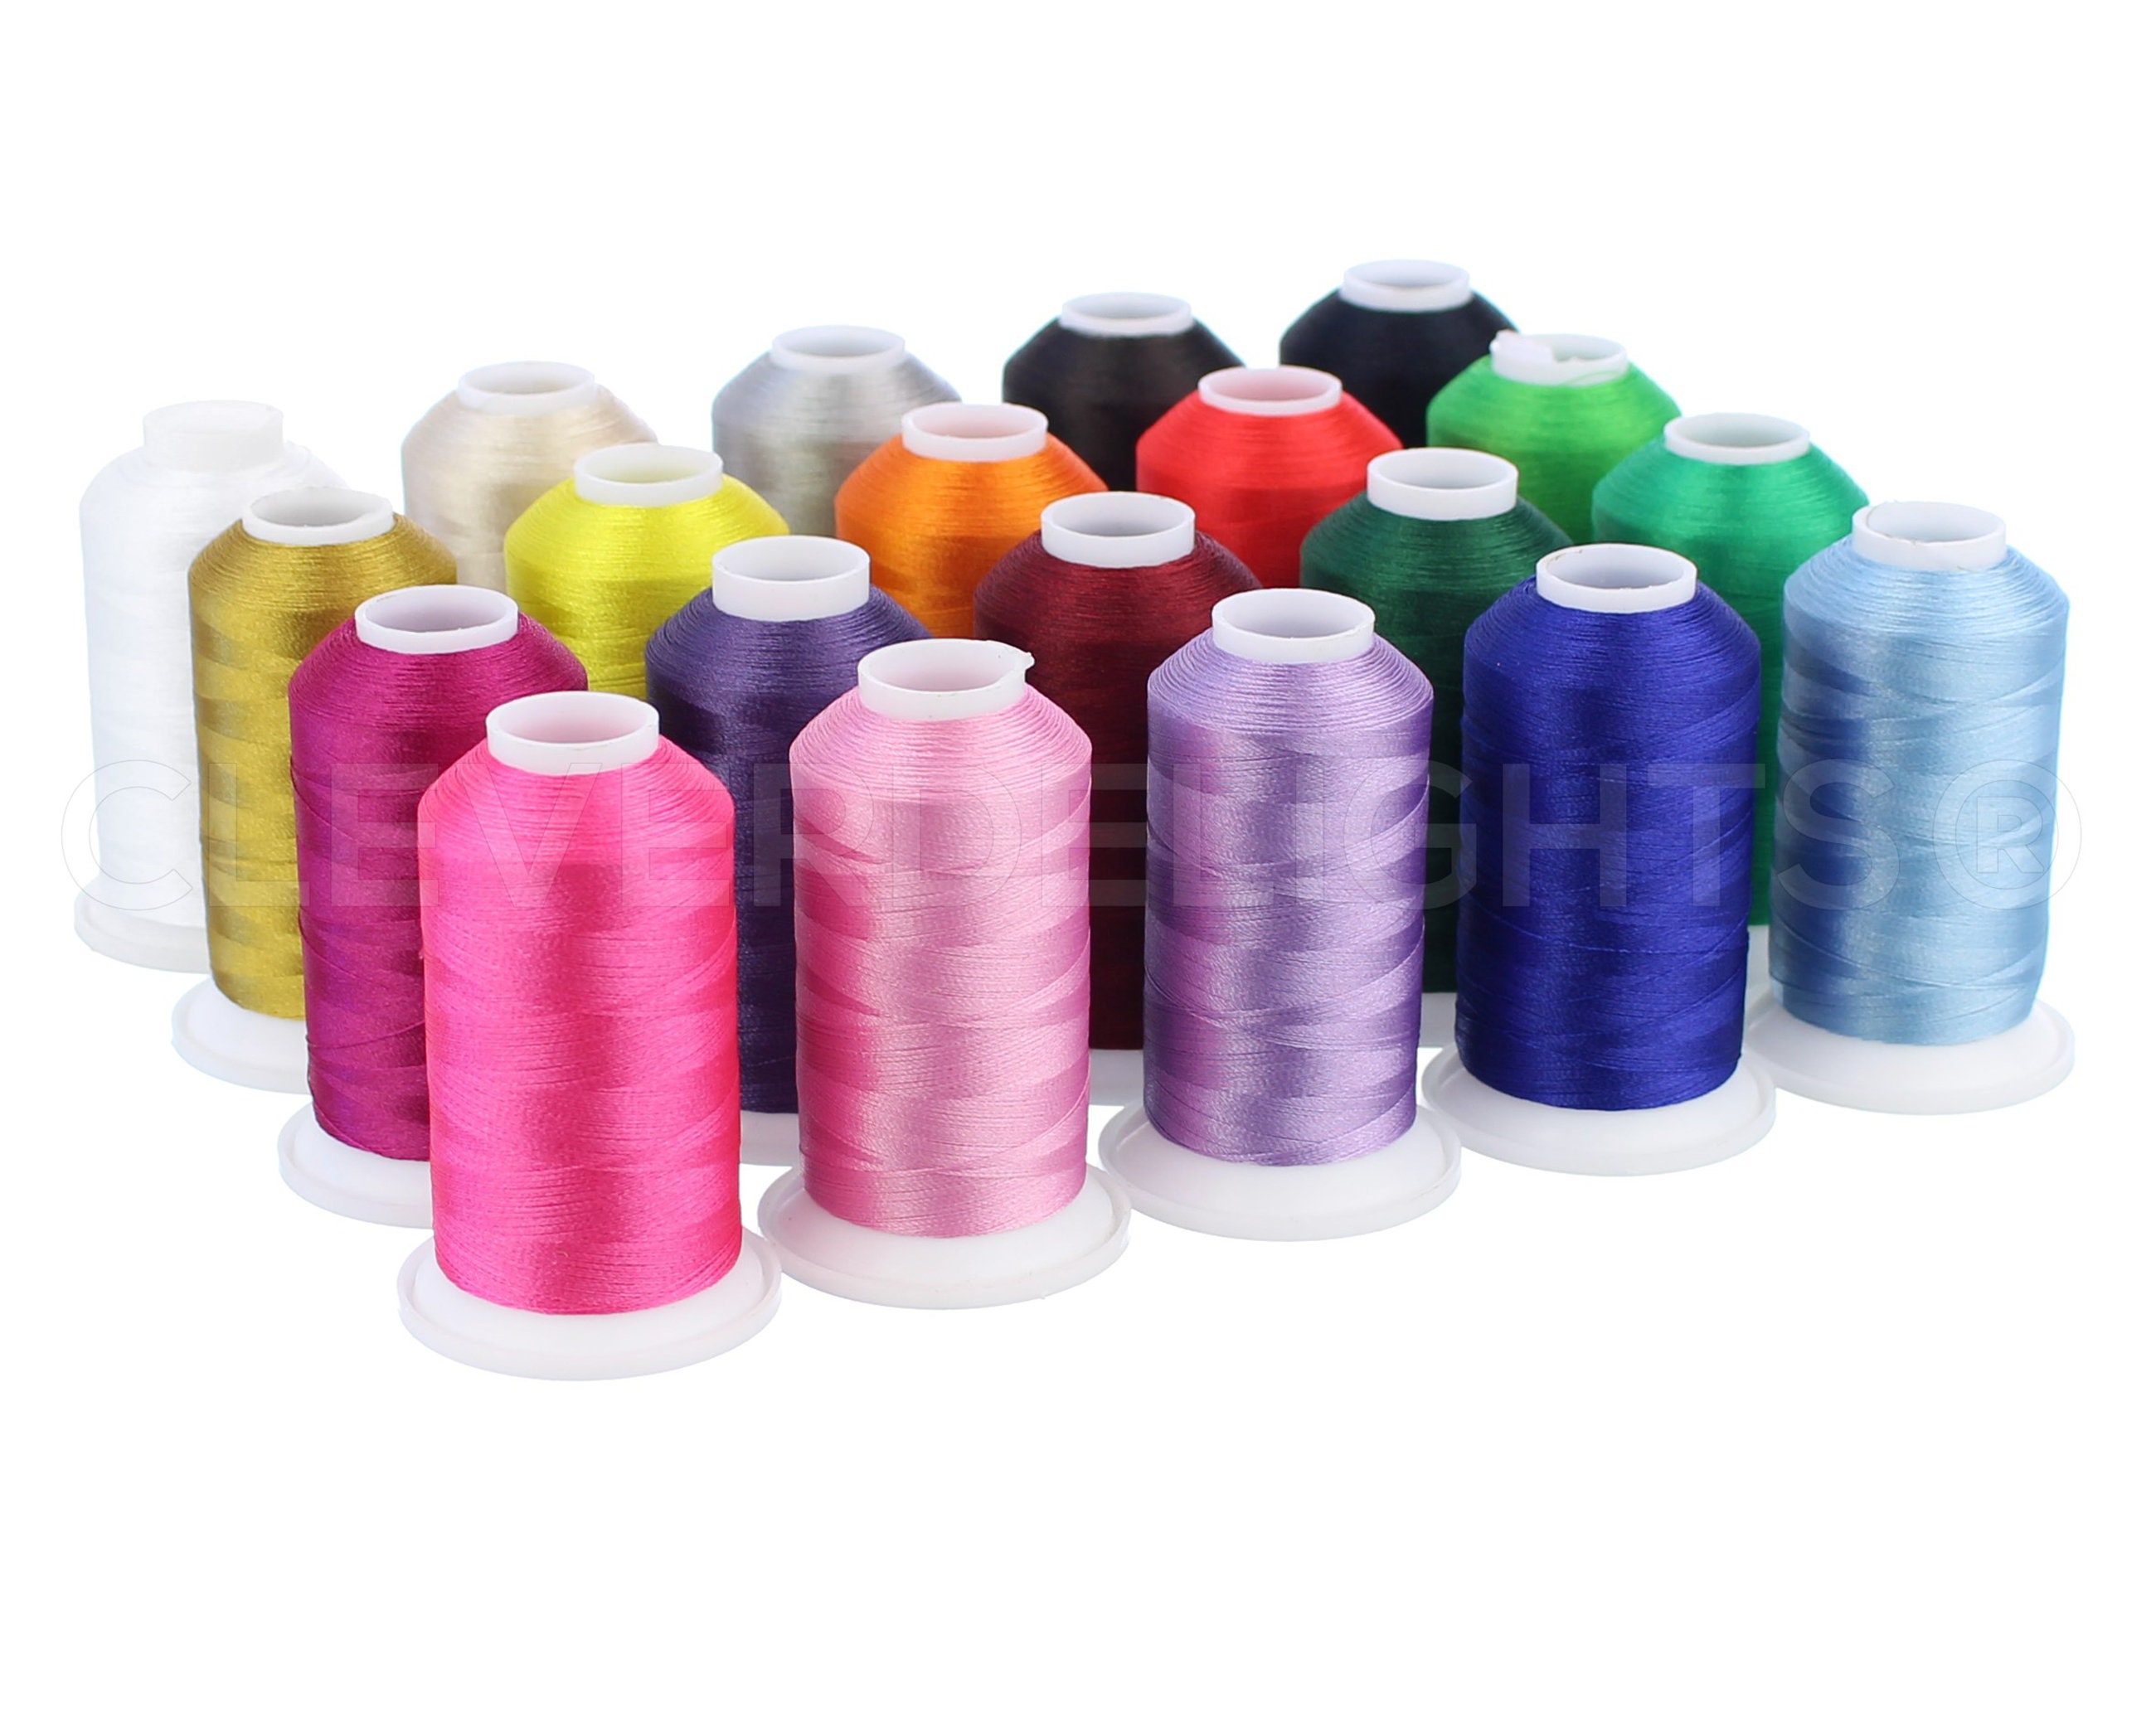 Sewing Machine Thread Kit 20 Colors All Purpose Polyester Thread Assortment 1000 Yards per Spool for Sewing, Hand Stitching and Quilting Use